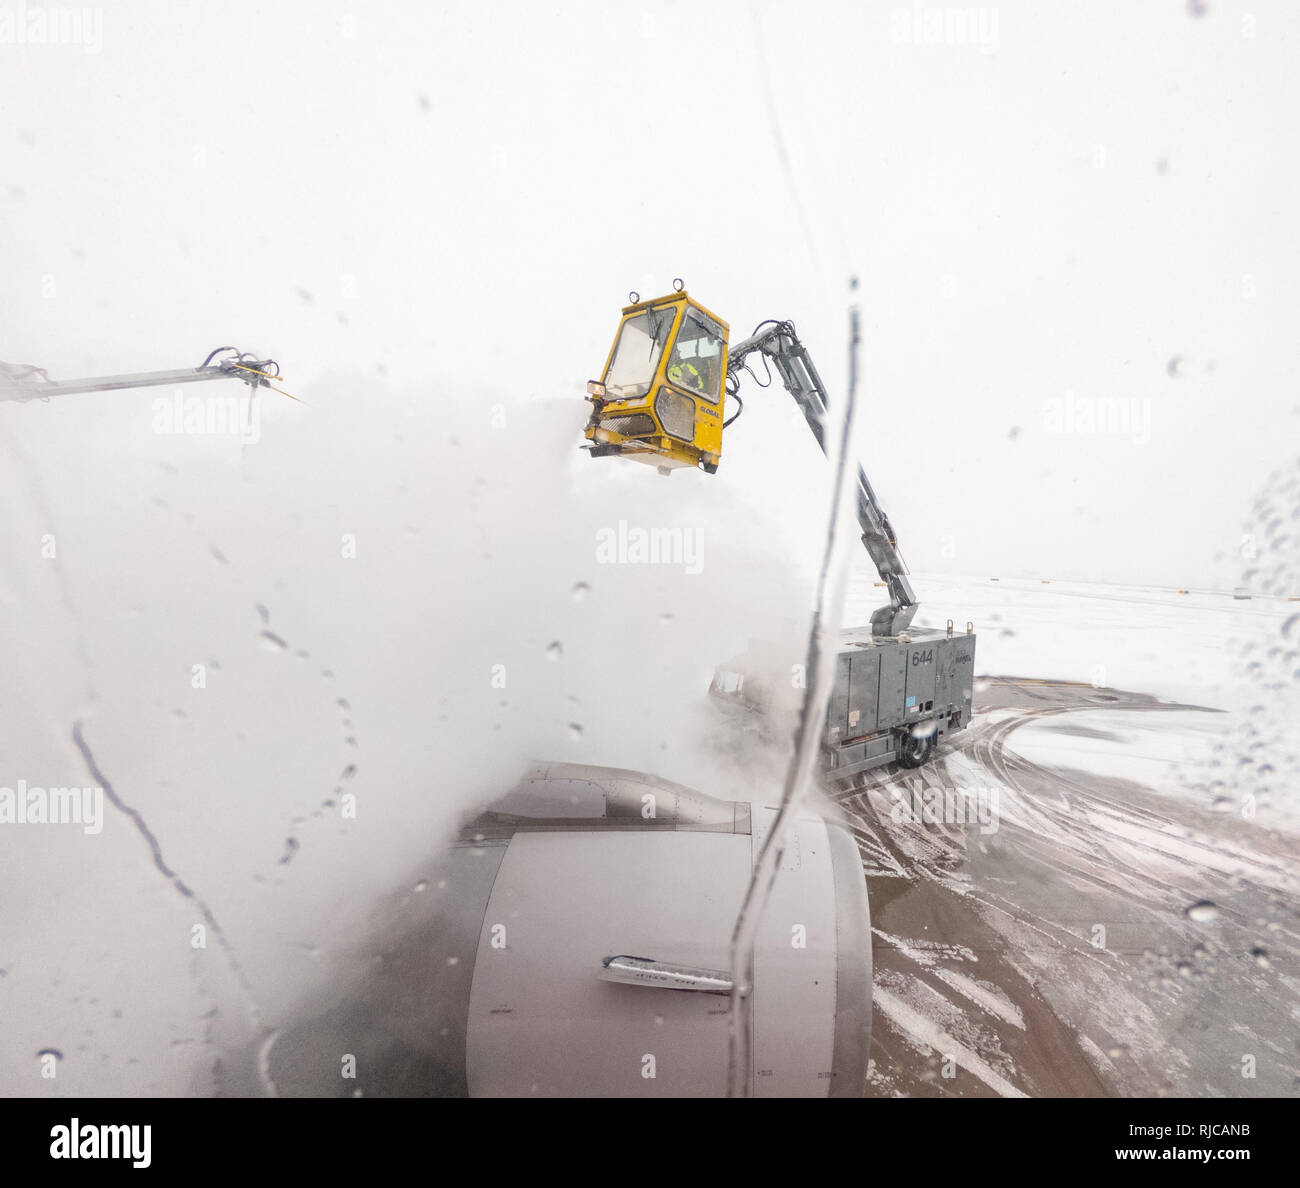 View from passenger window of de-icing of aircraft wing Stock Photo